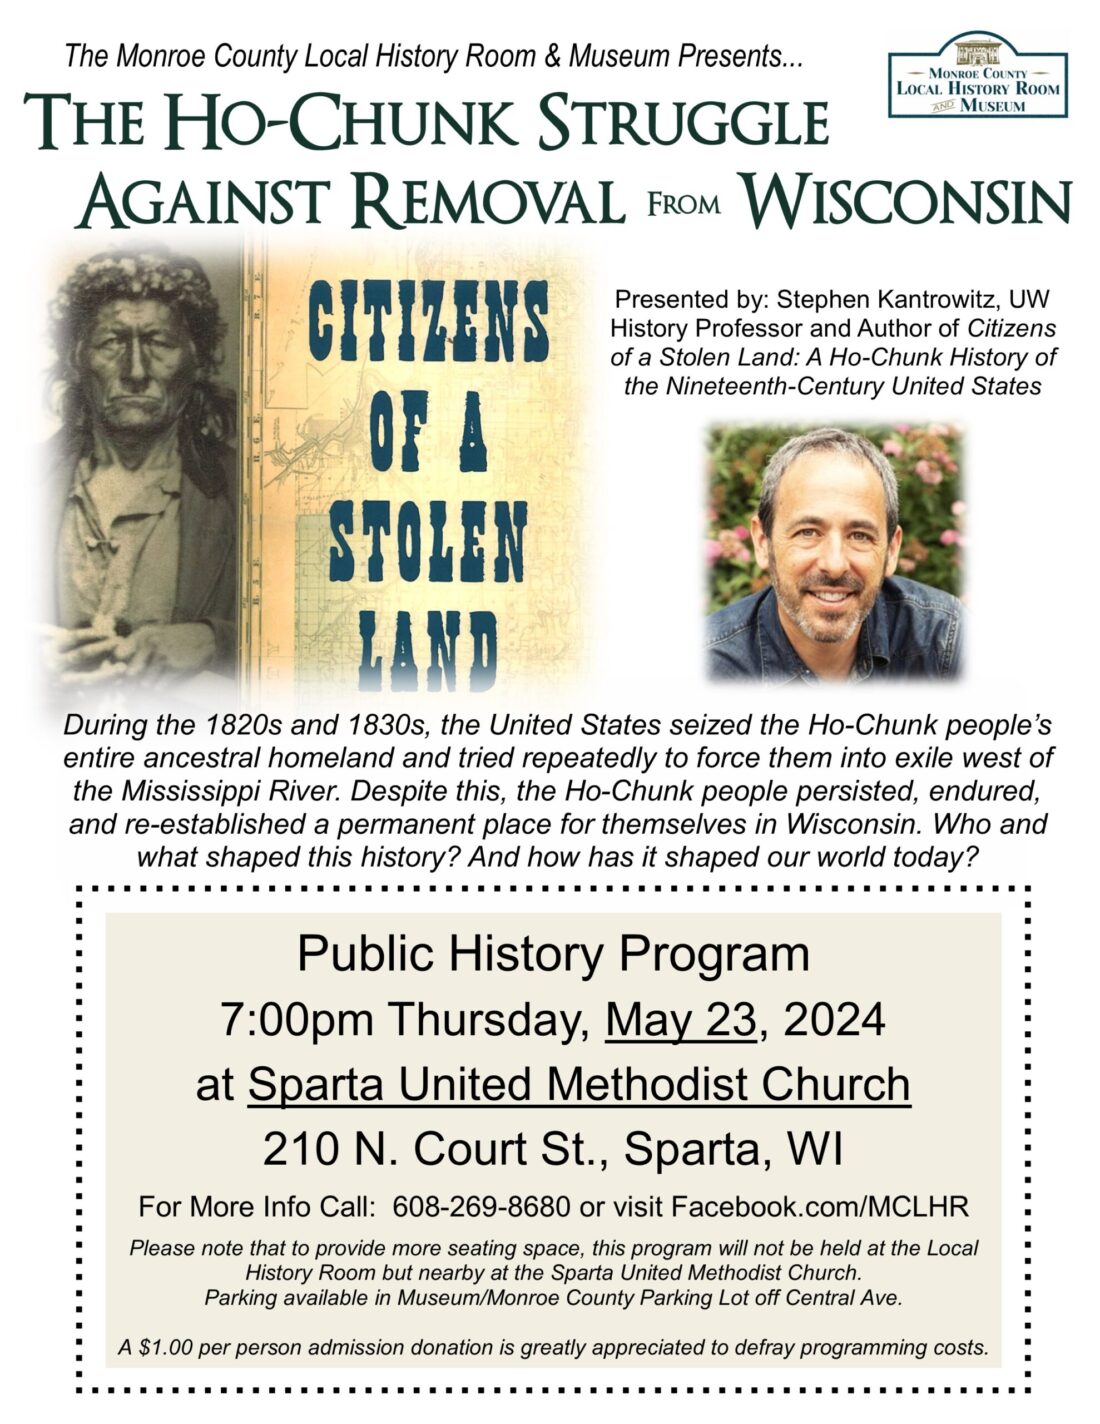 History Program: "The Ho-Chunk Struggle Against Removal from Wisconsin"